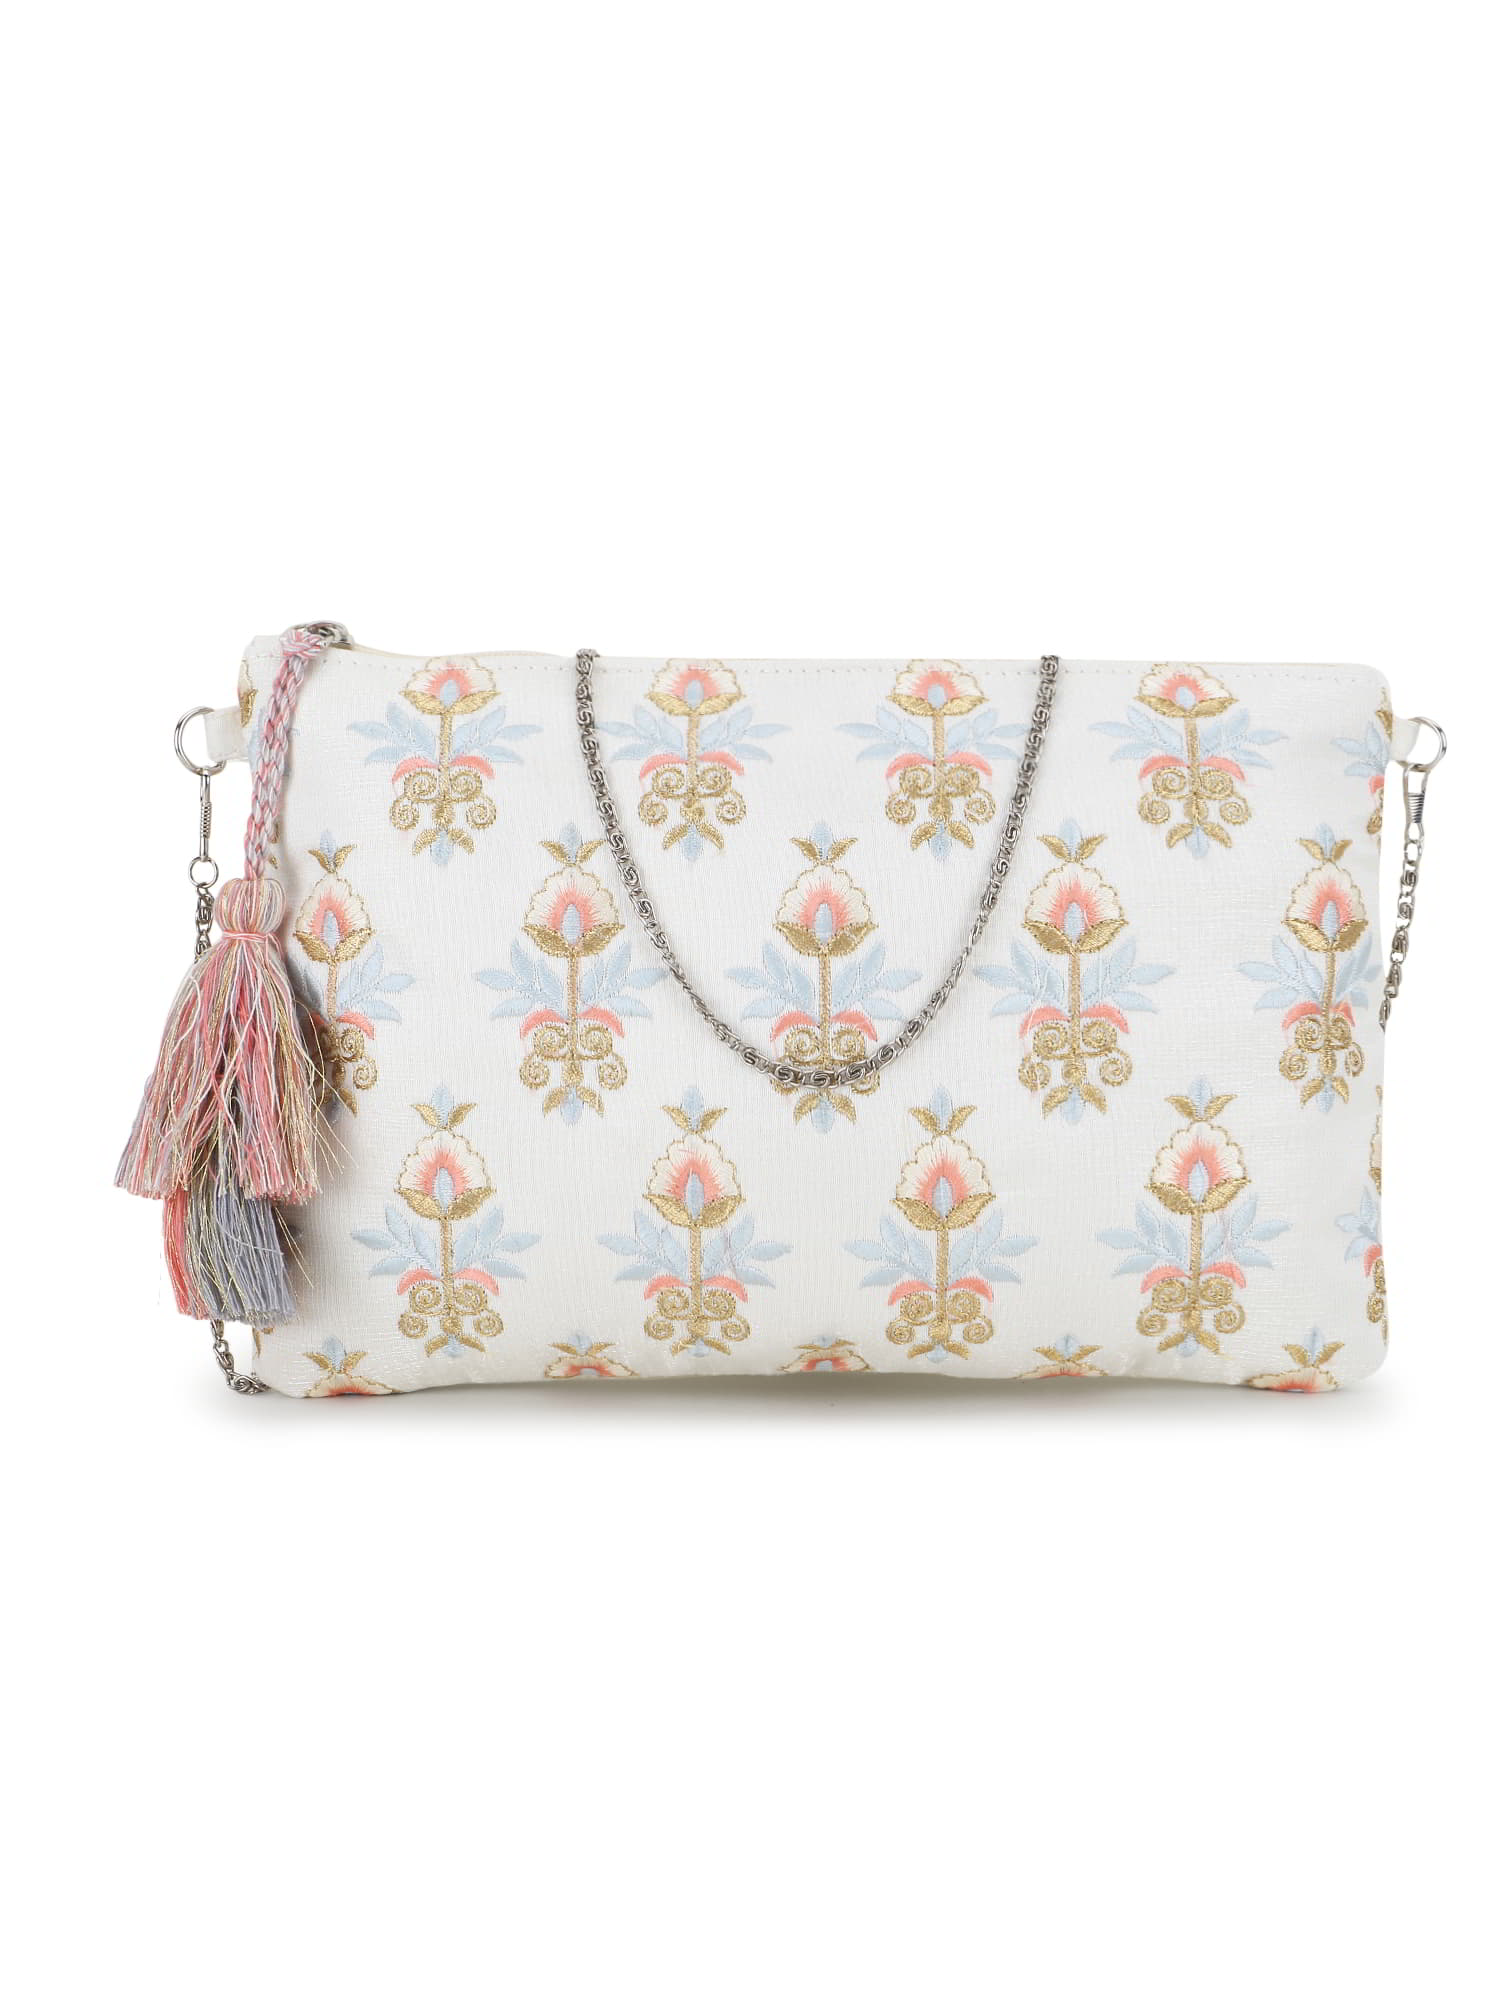 Ghoomar Polycotton Floral  Embroidered Sling Bag